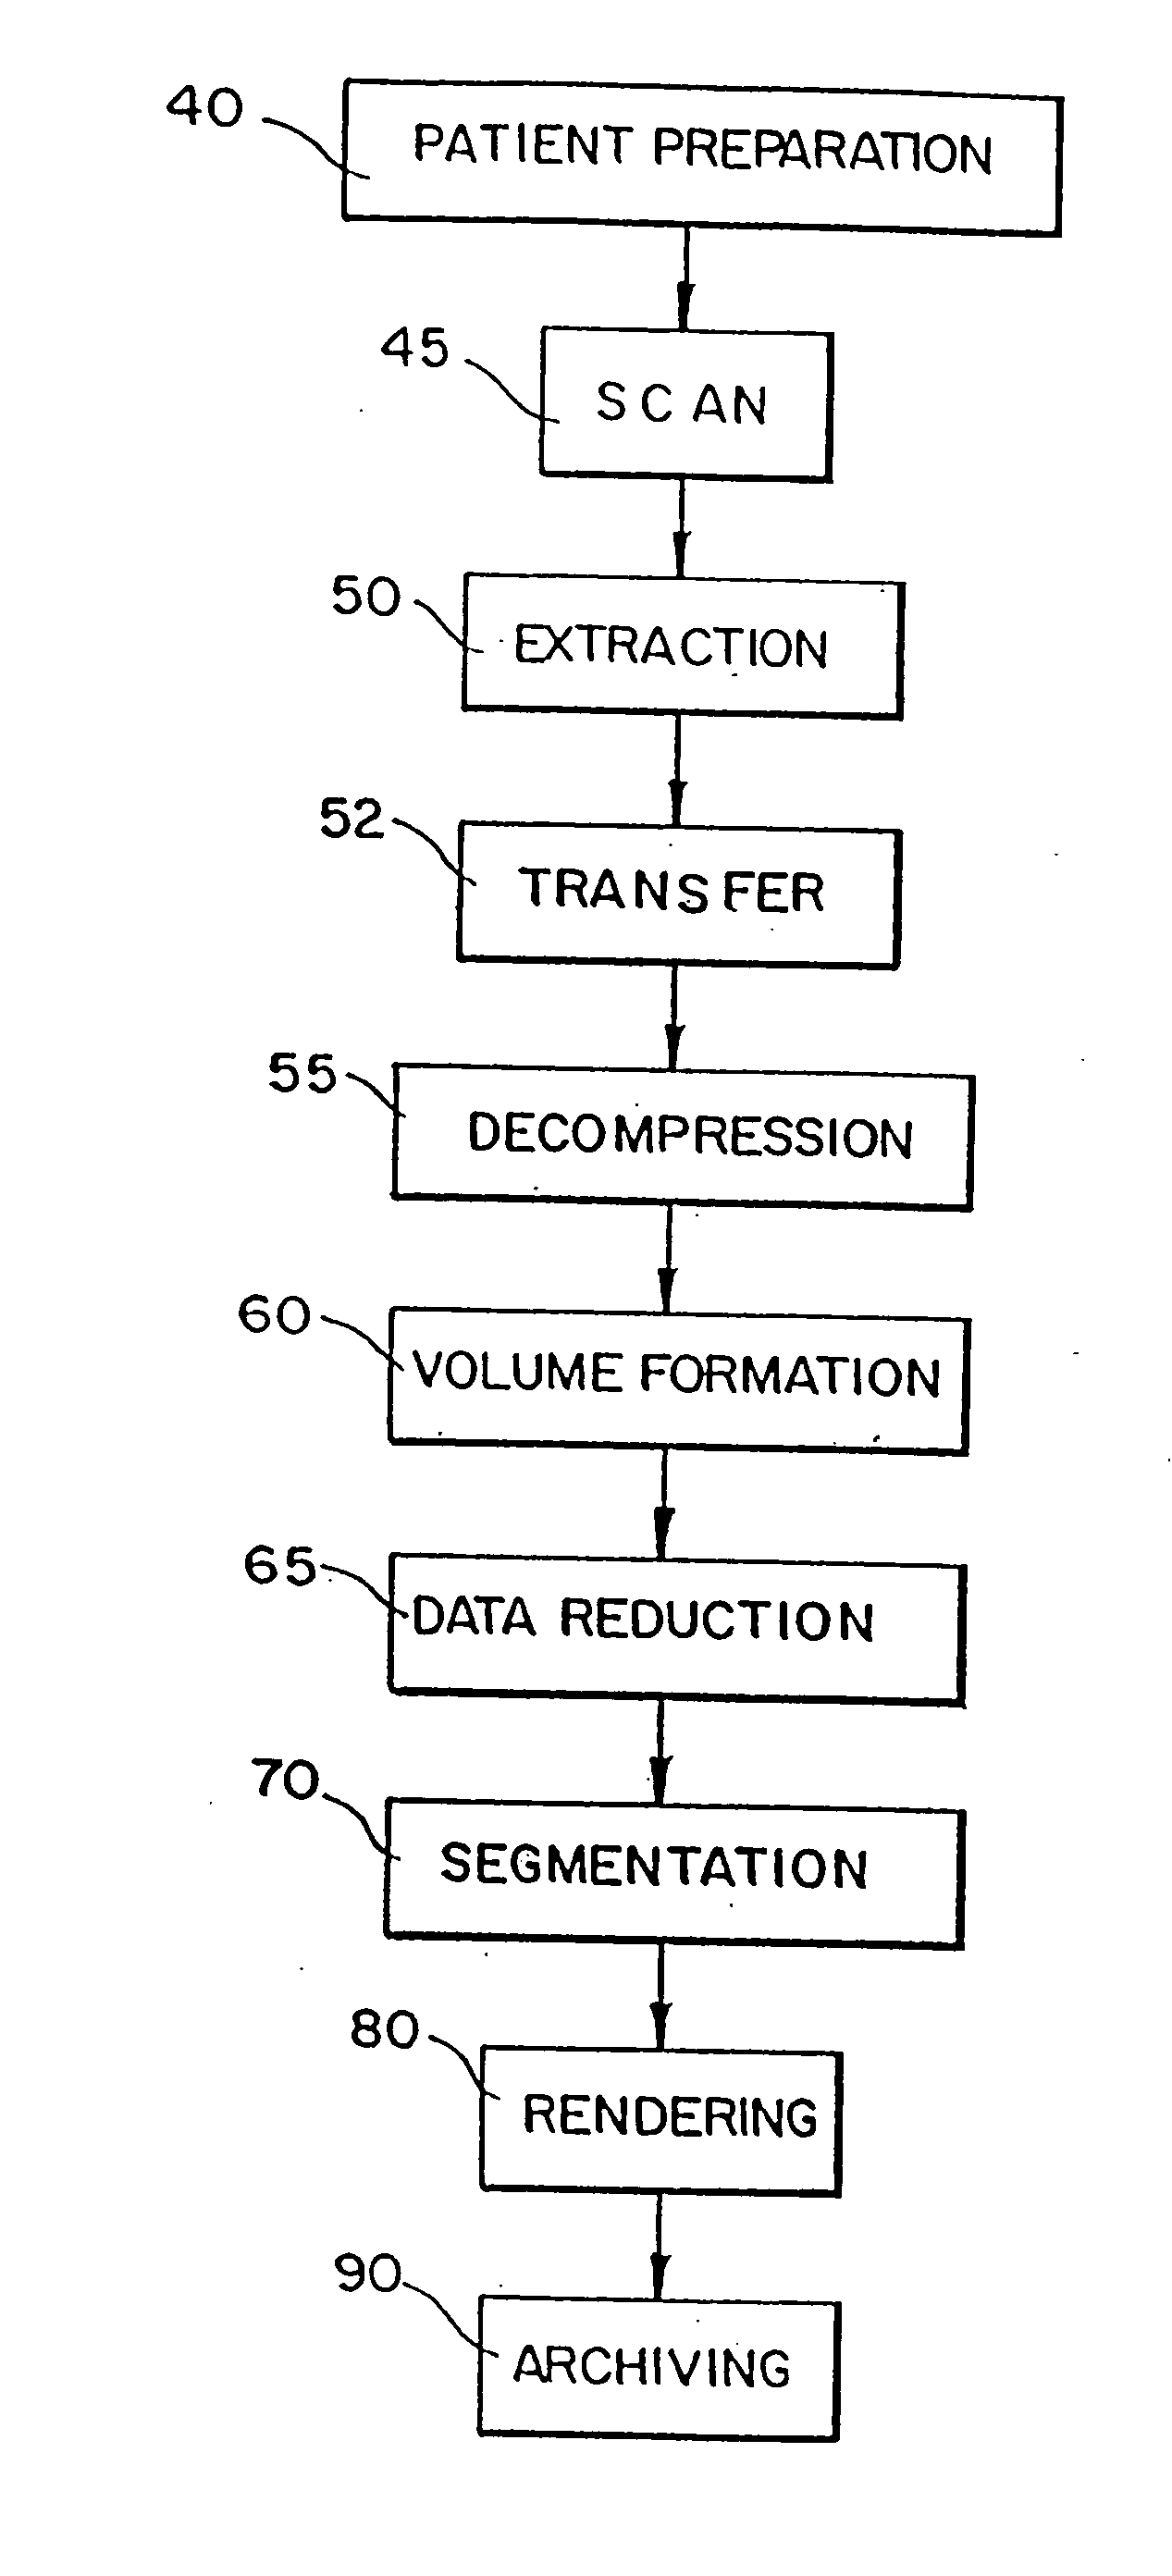 Method and system for producing interactive, three-dimensional renderings of selected body organs having hollow lumens to enable simulated movement through the lumen